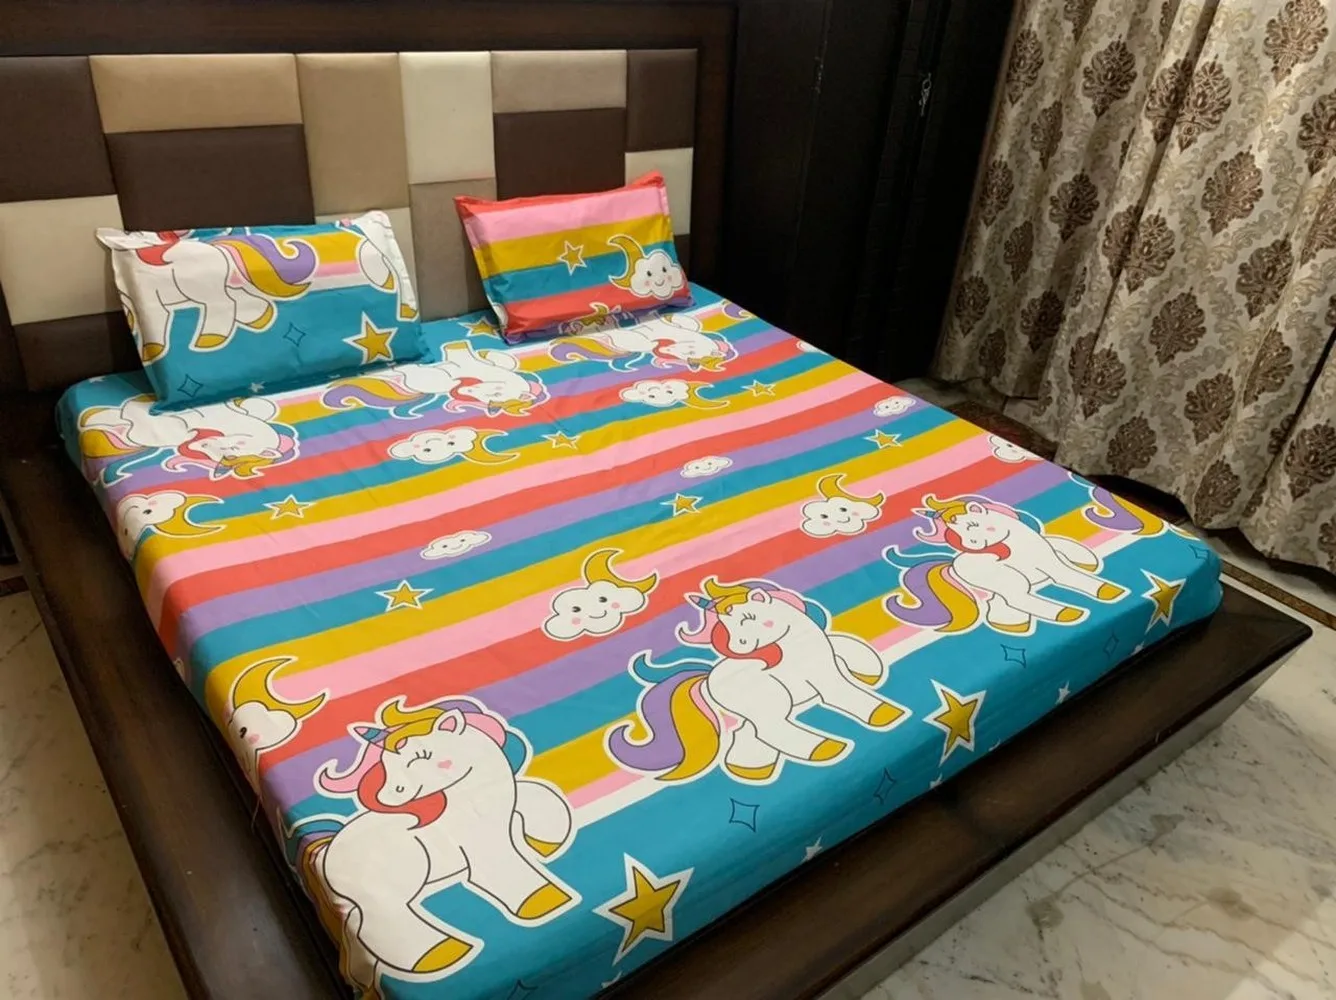 Bedsheet printed, Fitted, Elastic Corner, 90x100, Glace Cotton, 2 Pillow Covers, blue unicorn design